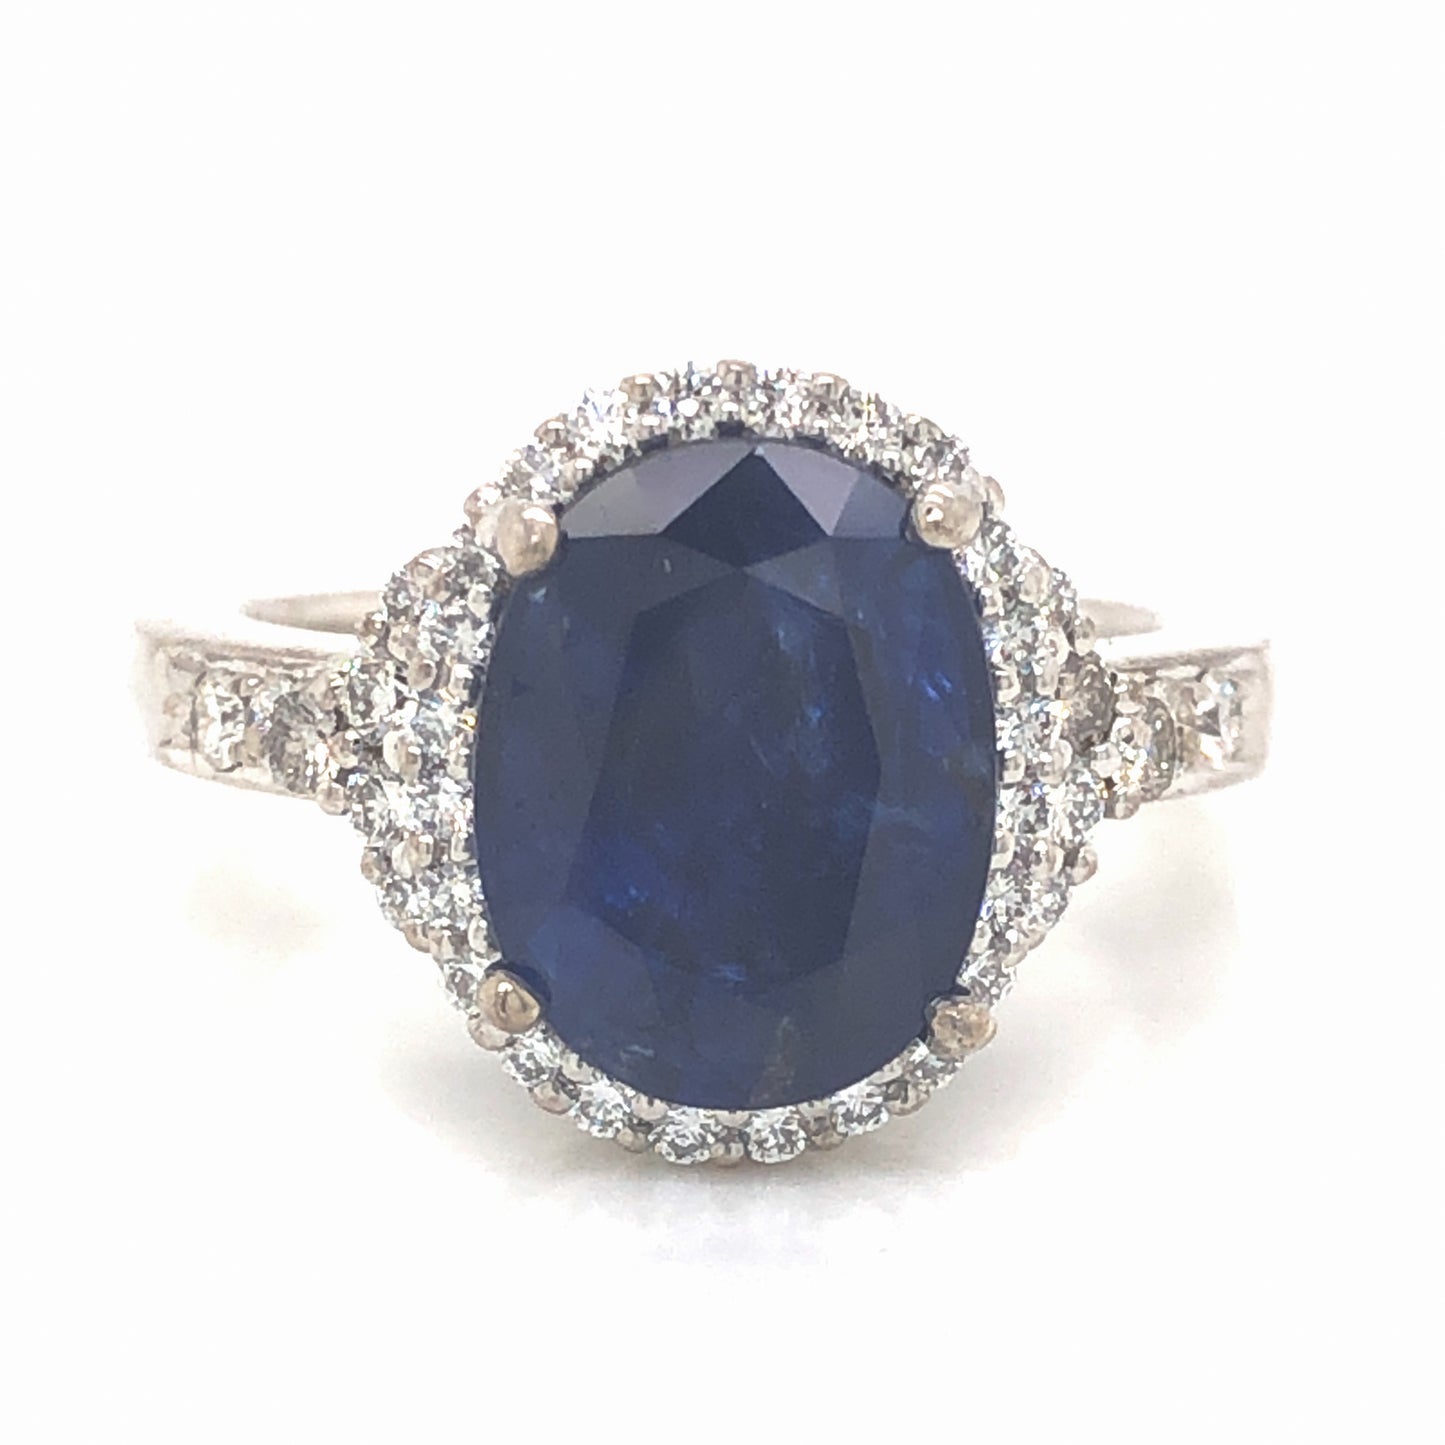 4.15 Oval Sapphire & Diamond Engagement Ring in 18k